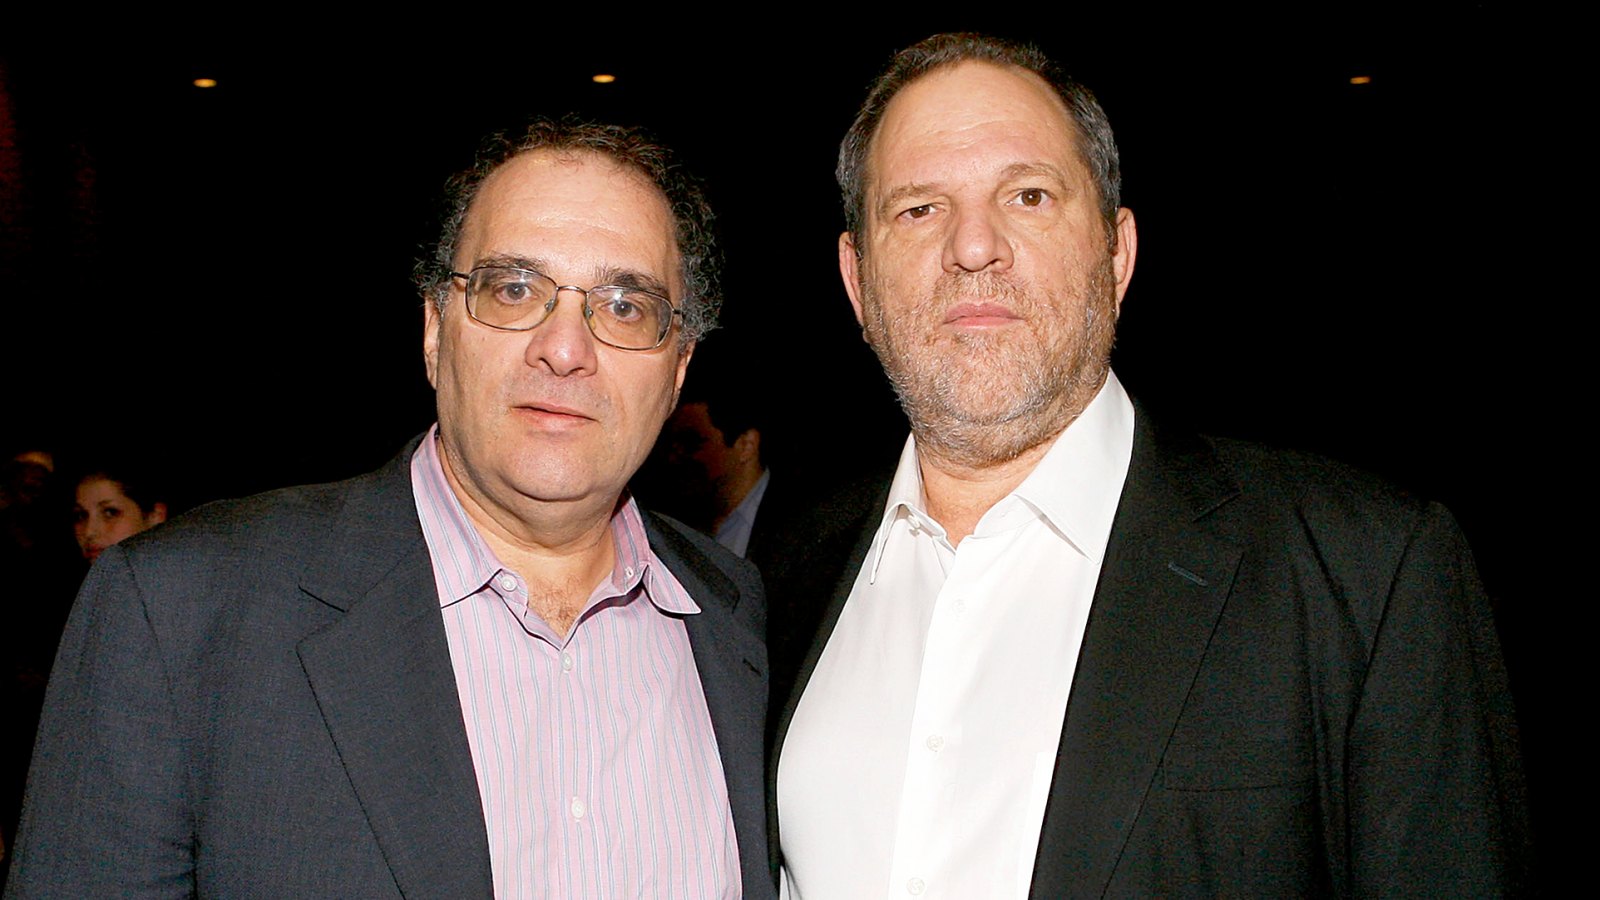 Bob Weinstein and Harvey Weinstein attends the New York premiere of Dimension Films' "The Road" at Clearview Chelsea Cinemas on November 16, 2009 in New York City.